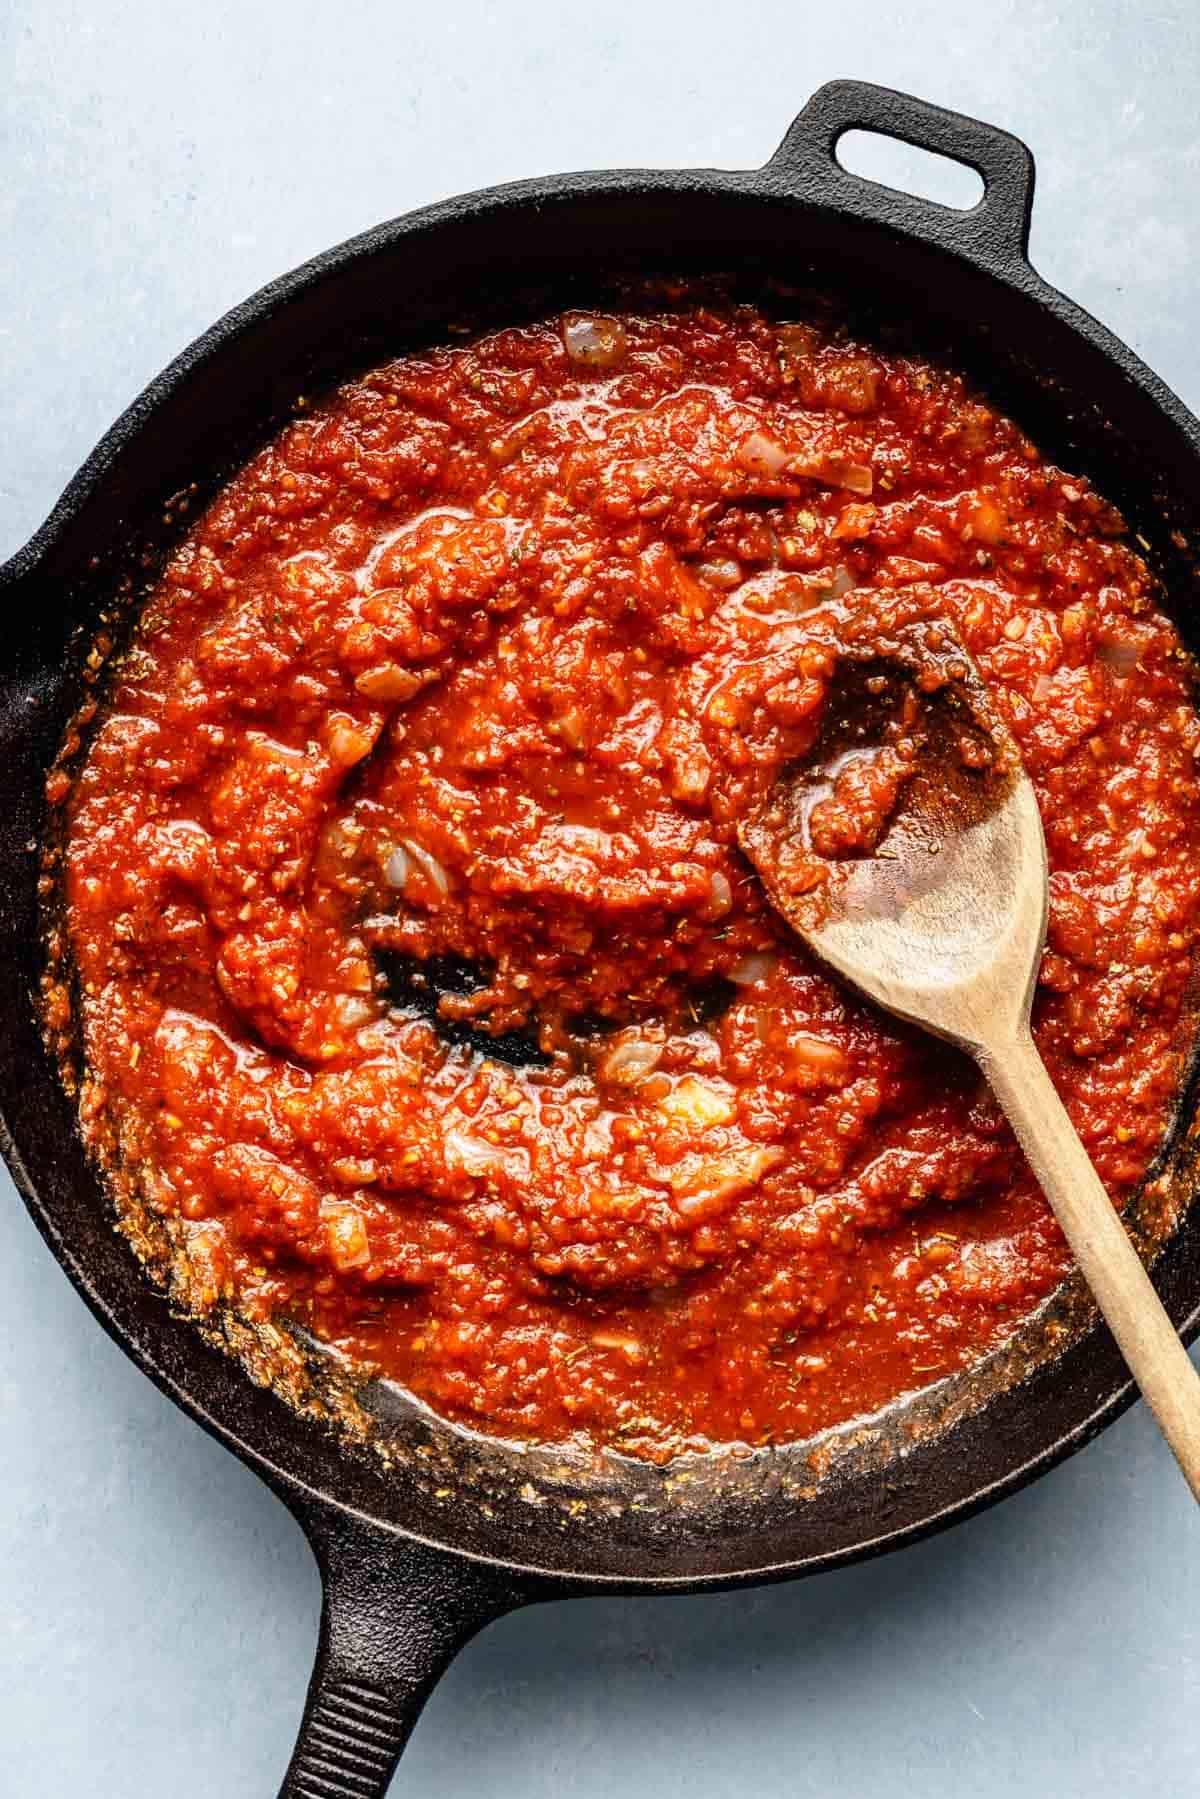 tomato sauce in a cast iron skillet with a wooden spoon